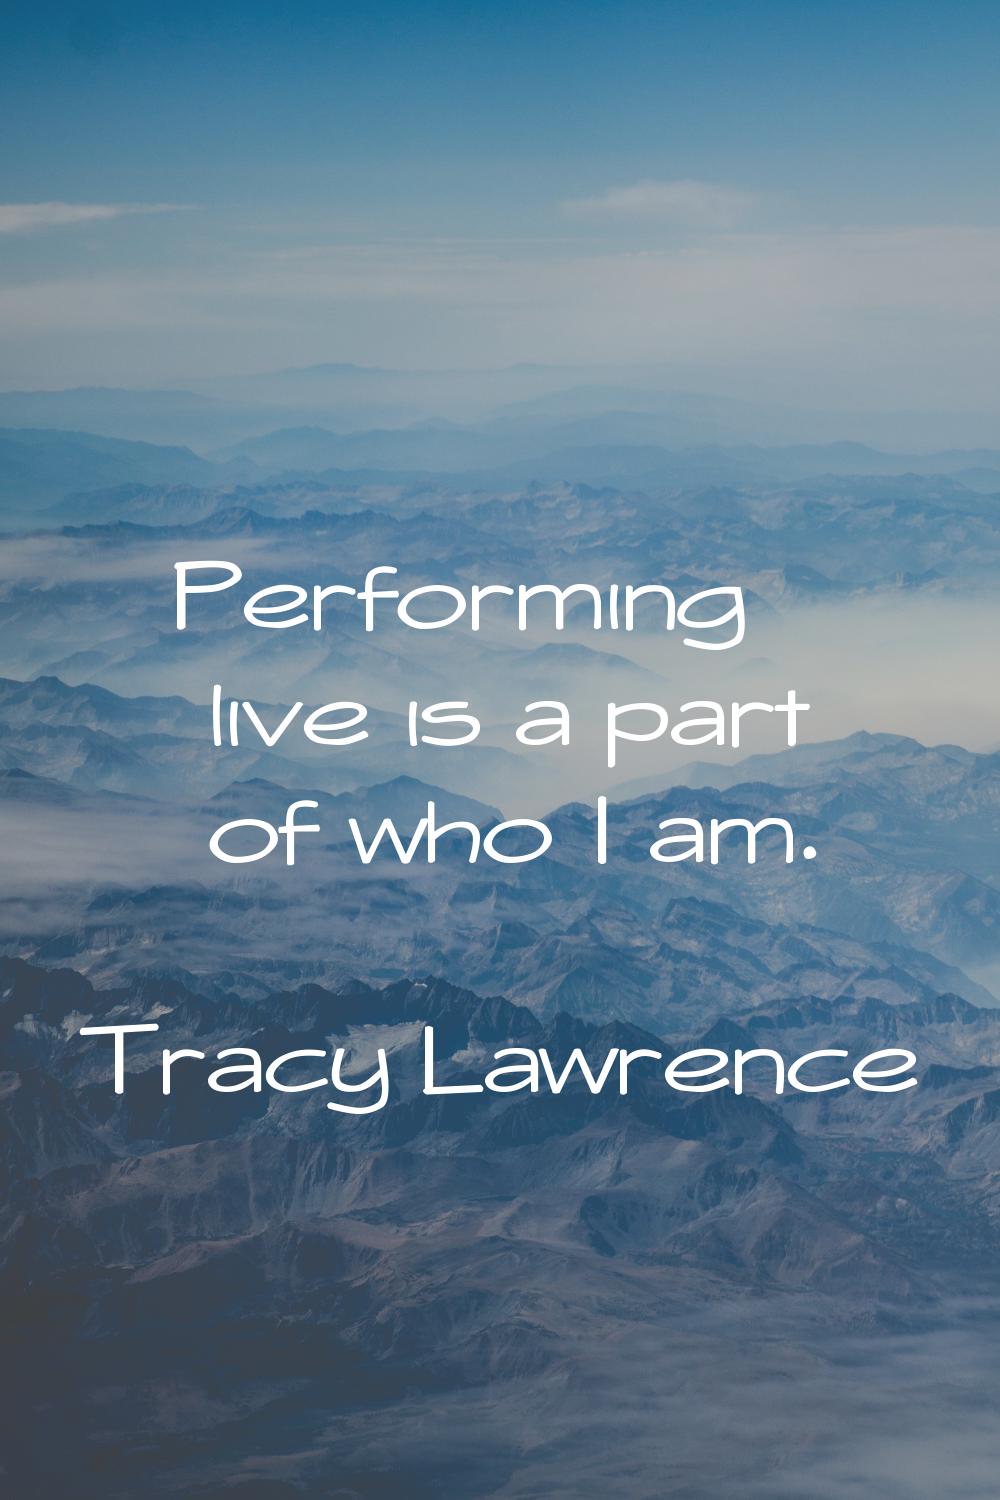 Performing live is a part of who I am.